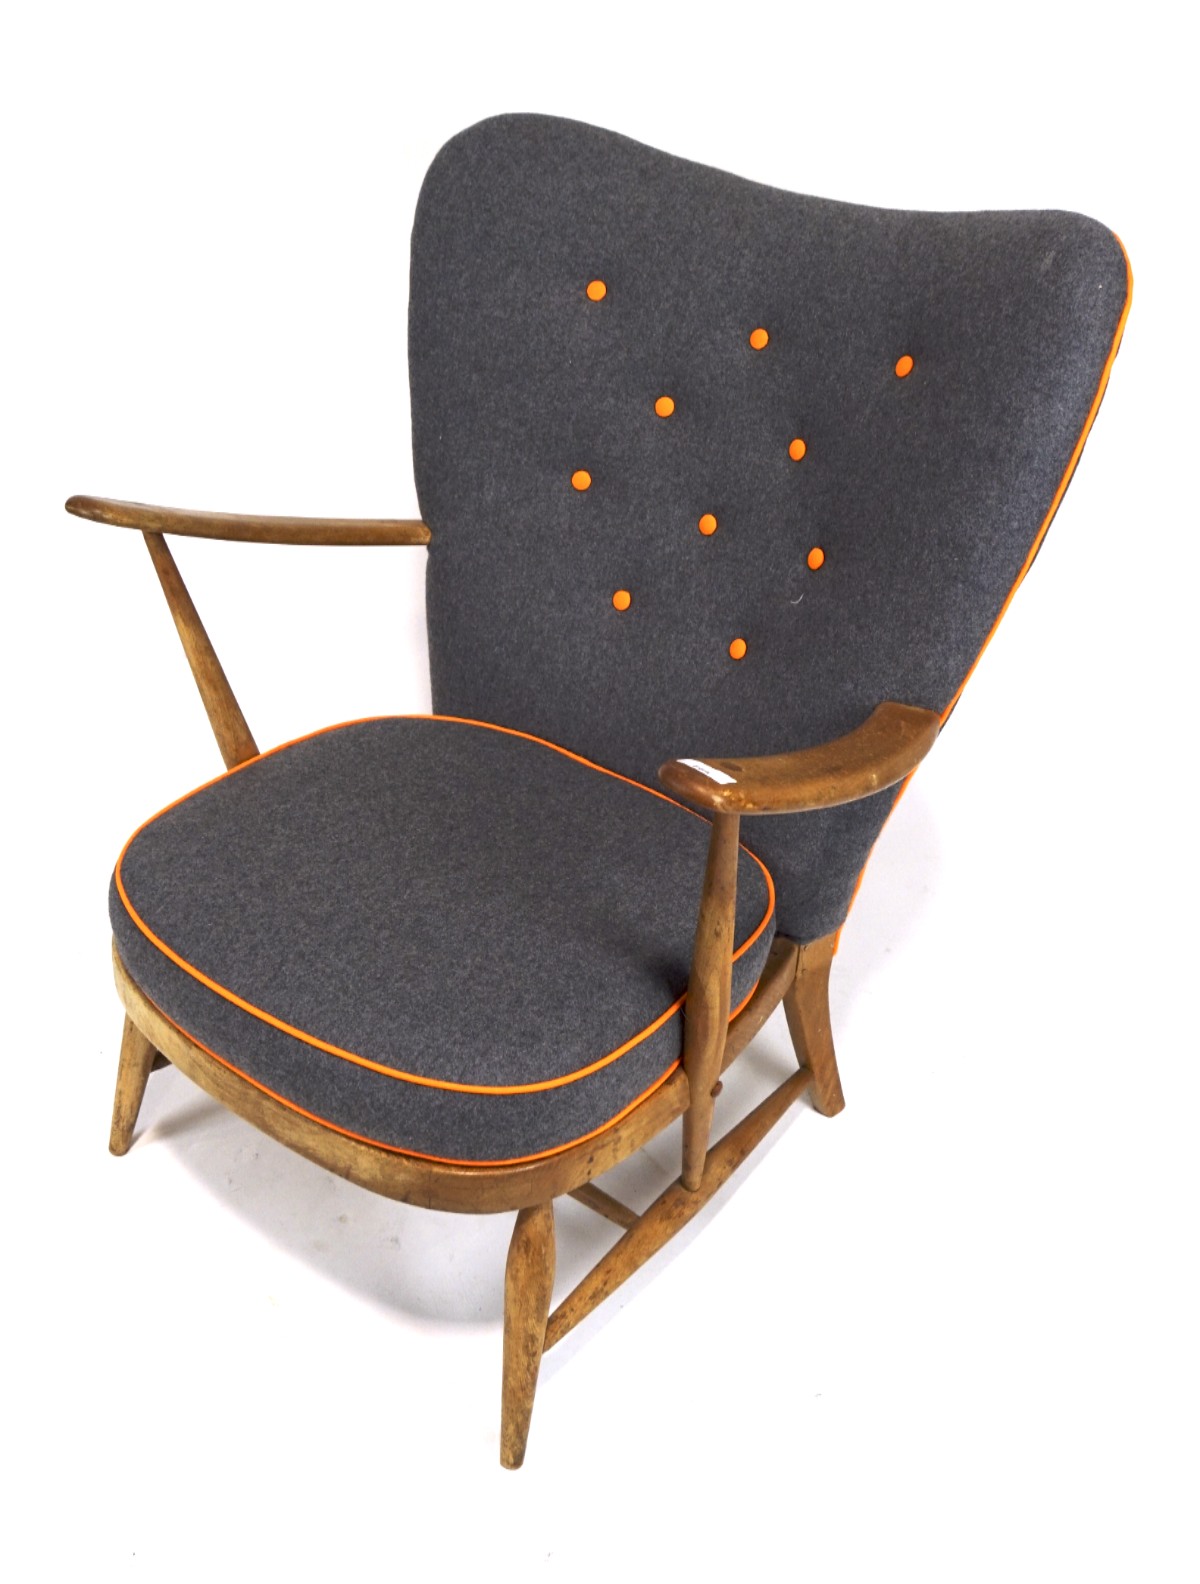 A rare Ercol model 312 1950s vintage wing back lounge chair.